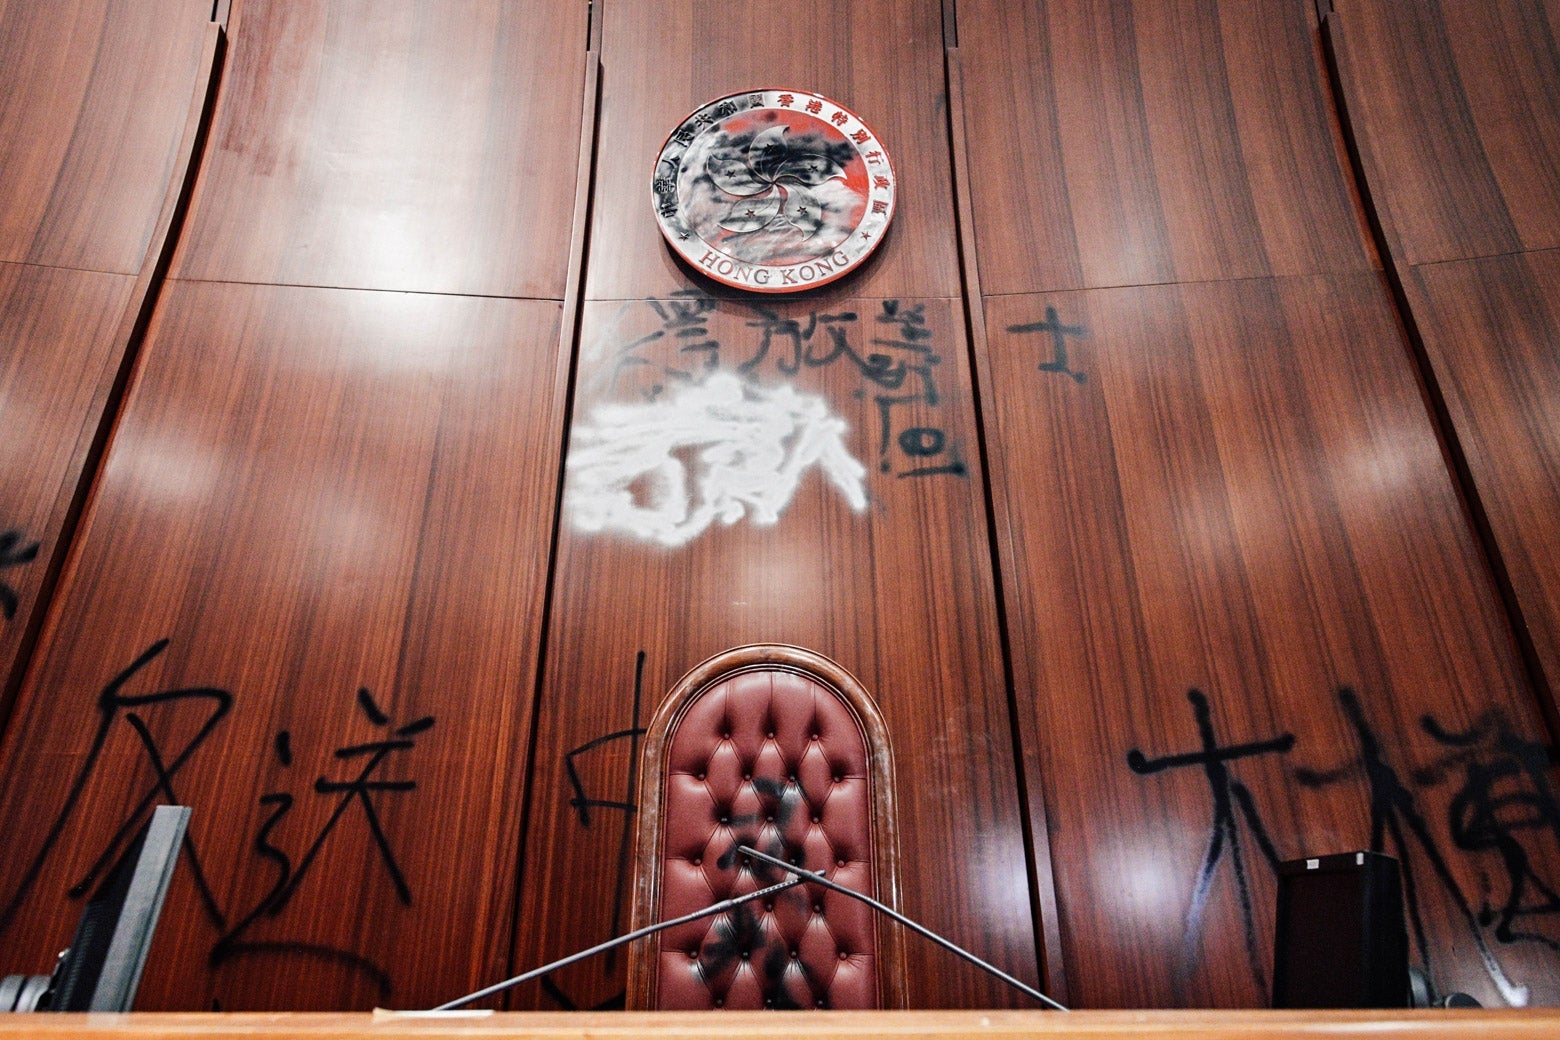 Graffiti is seen in the main chamber of the Legislative Council in Hong Kong.